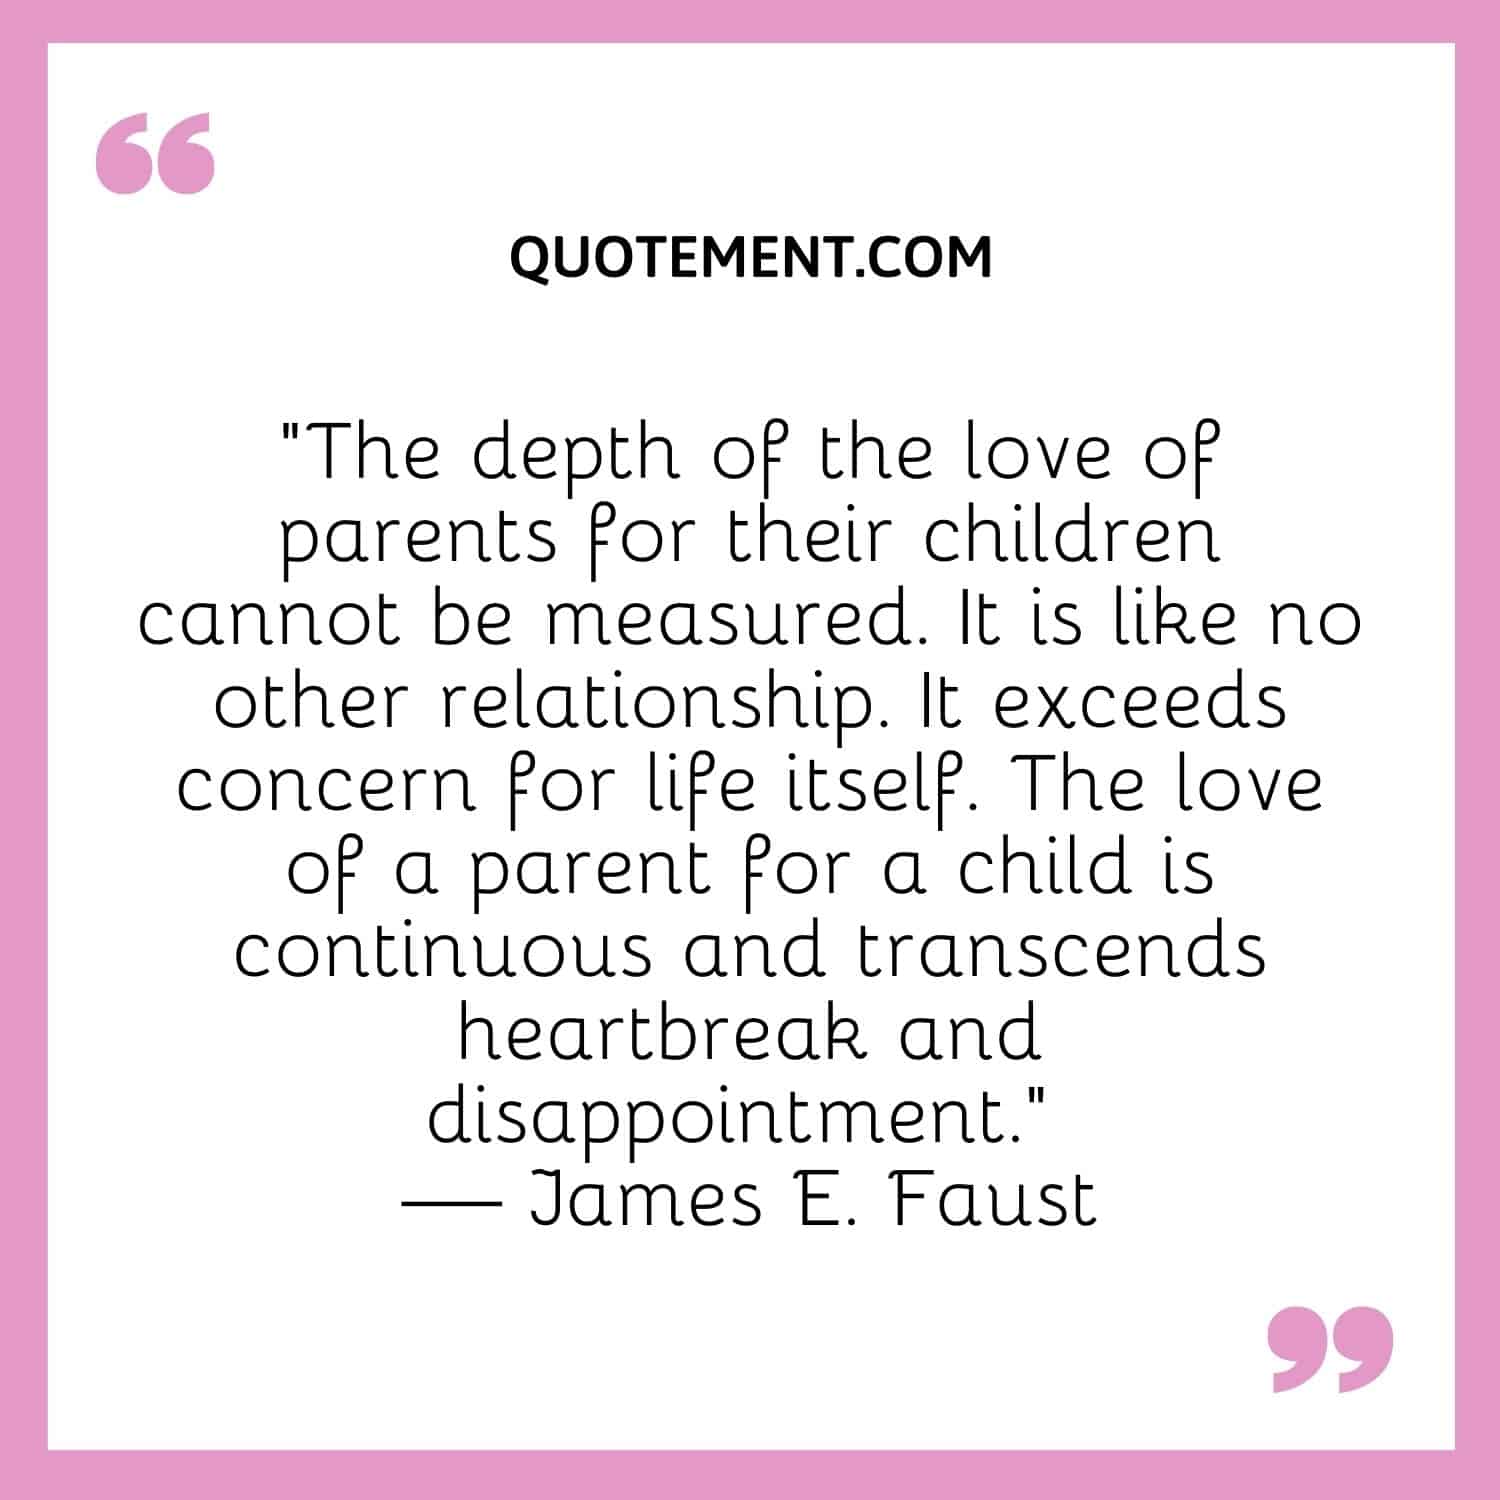 “The depth of the love of parents for their children cannot be measured.